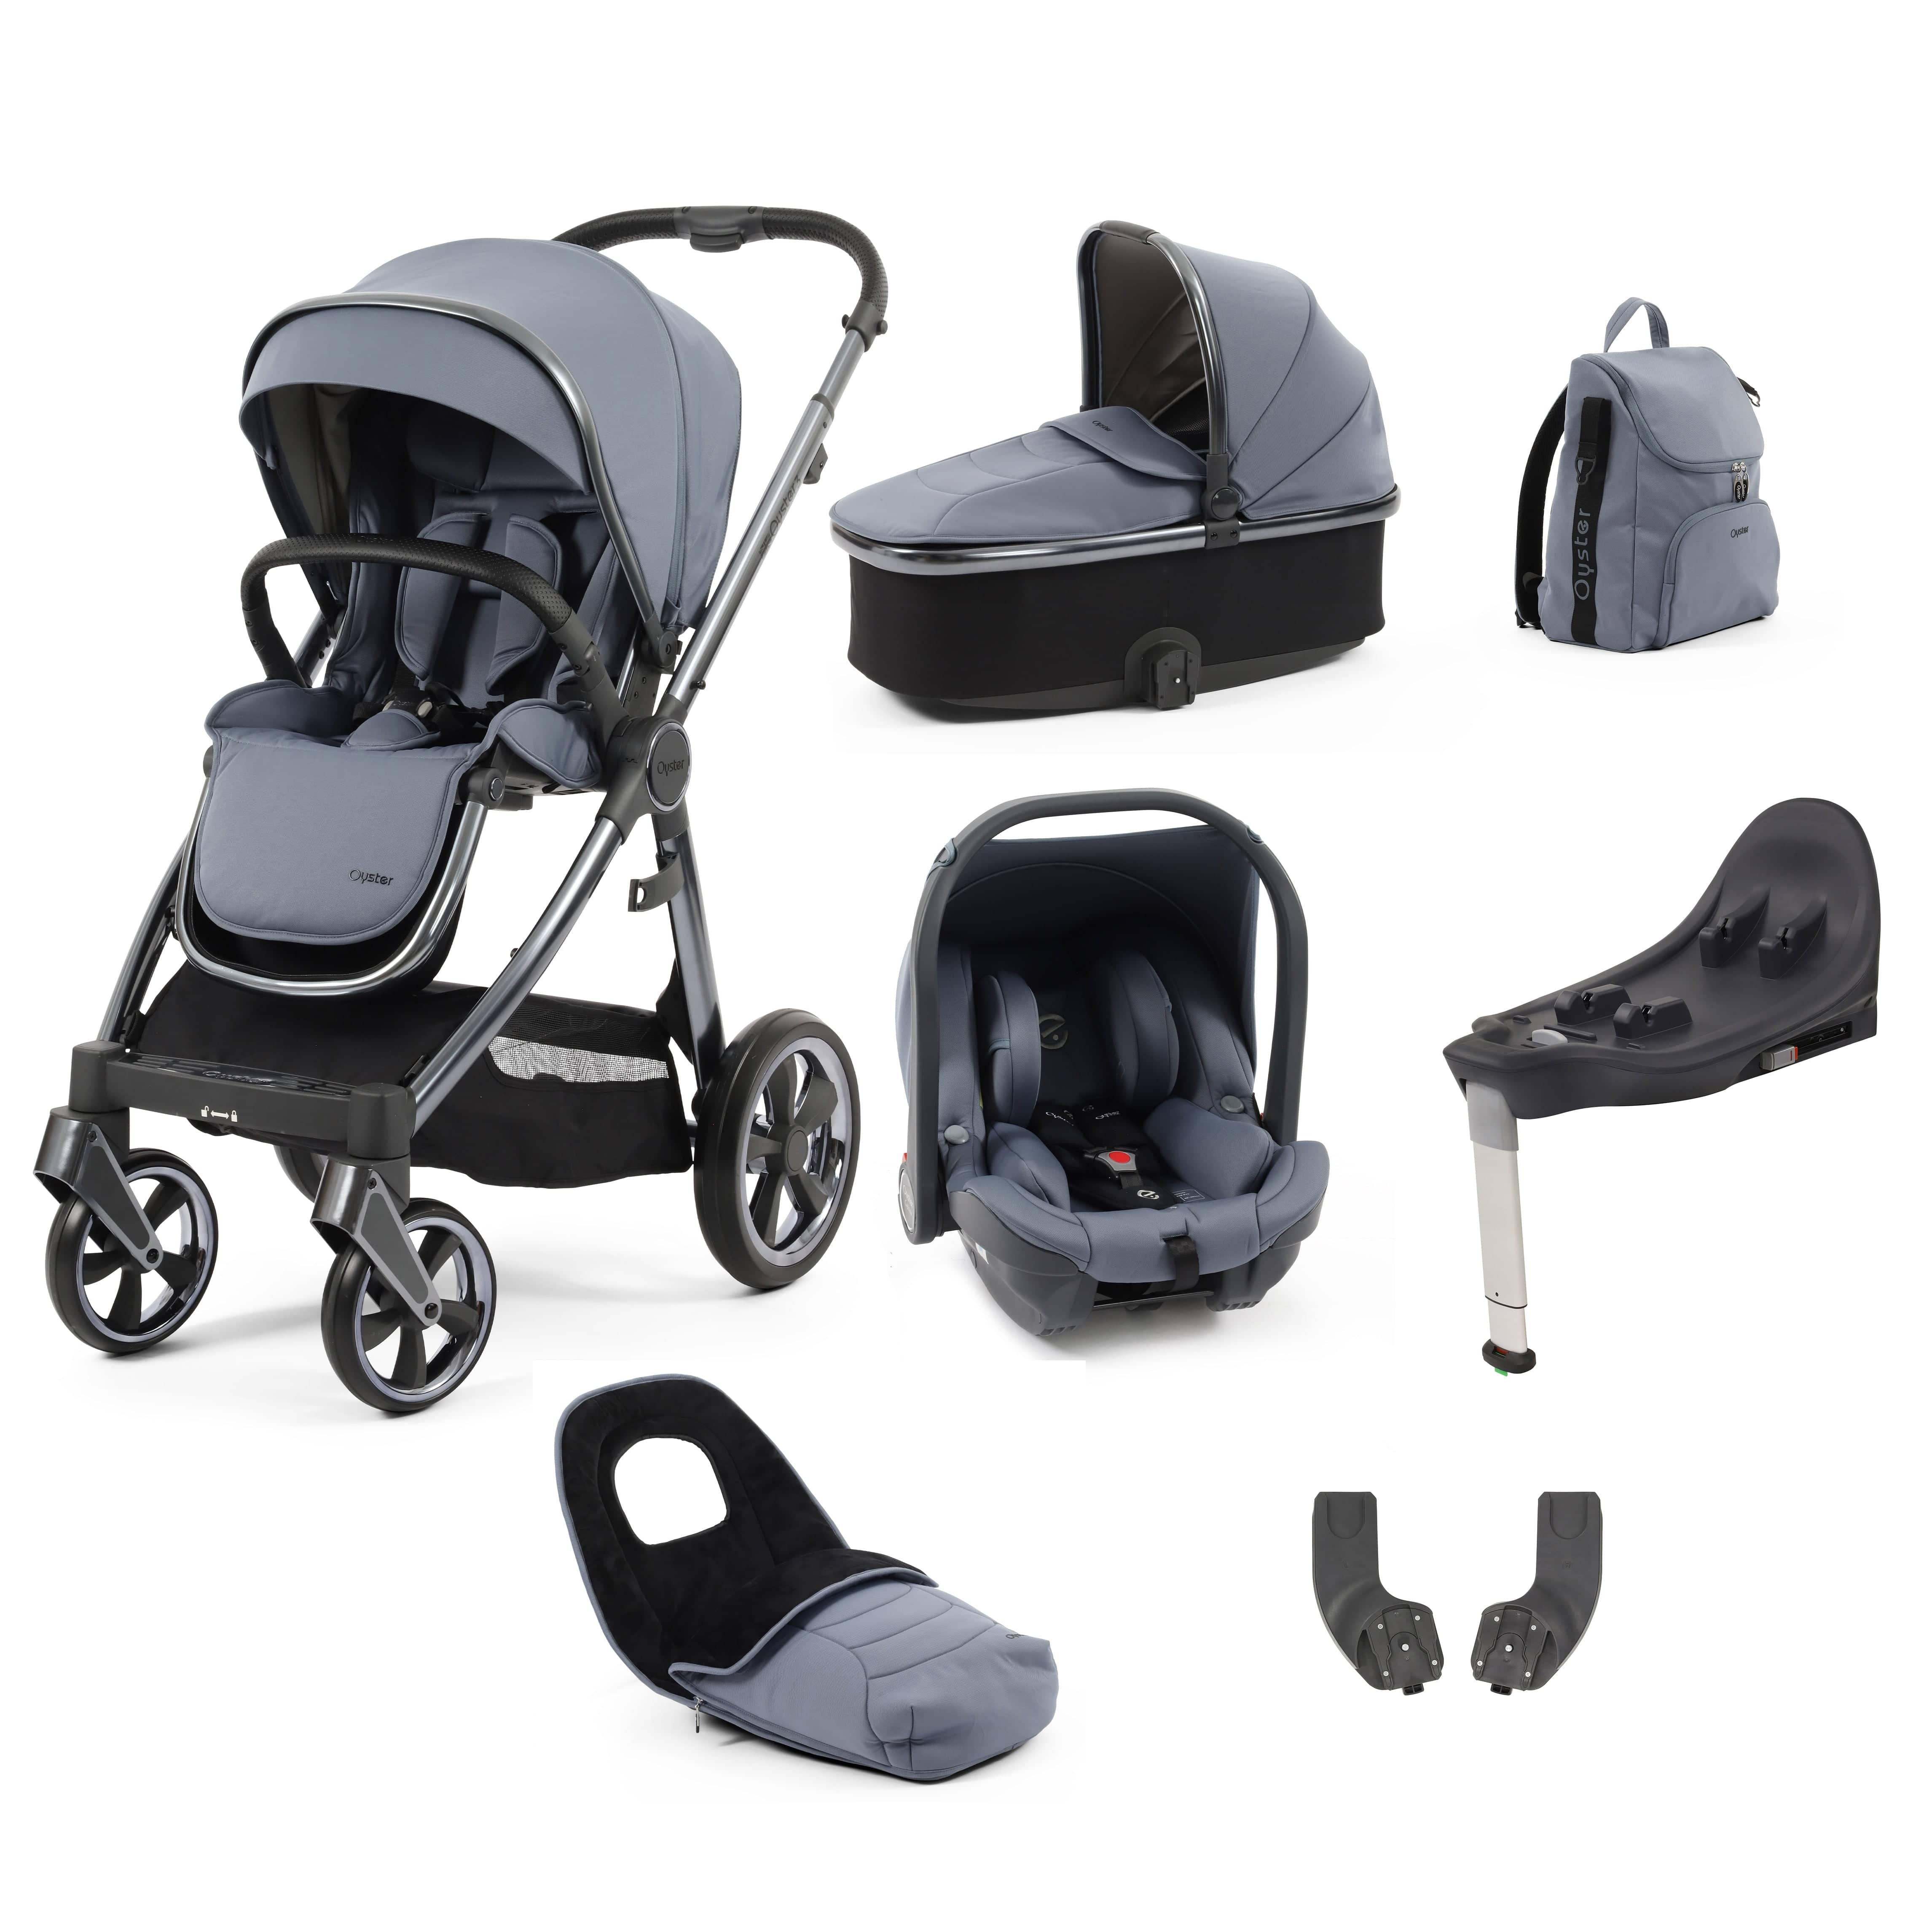 Babystyle Oyster 3 Luxury 7 Piece with Car Seat Bundle in Dream Blue Travel Systems 14772-DMB 5060711567228